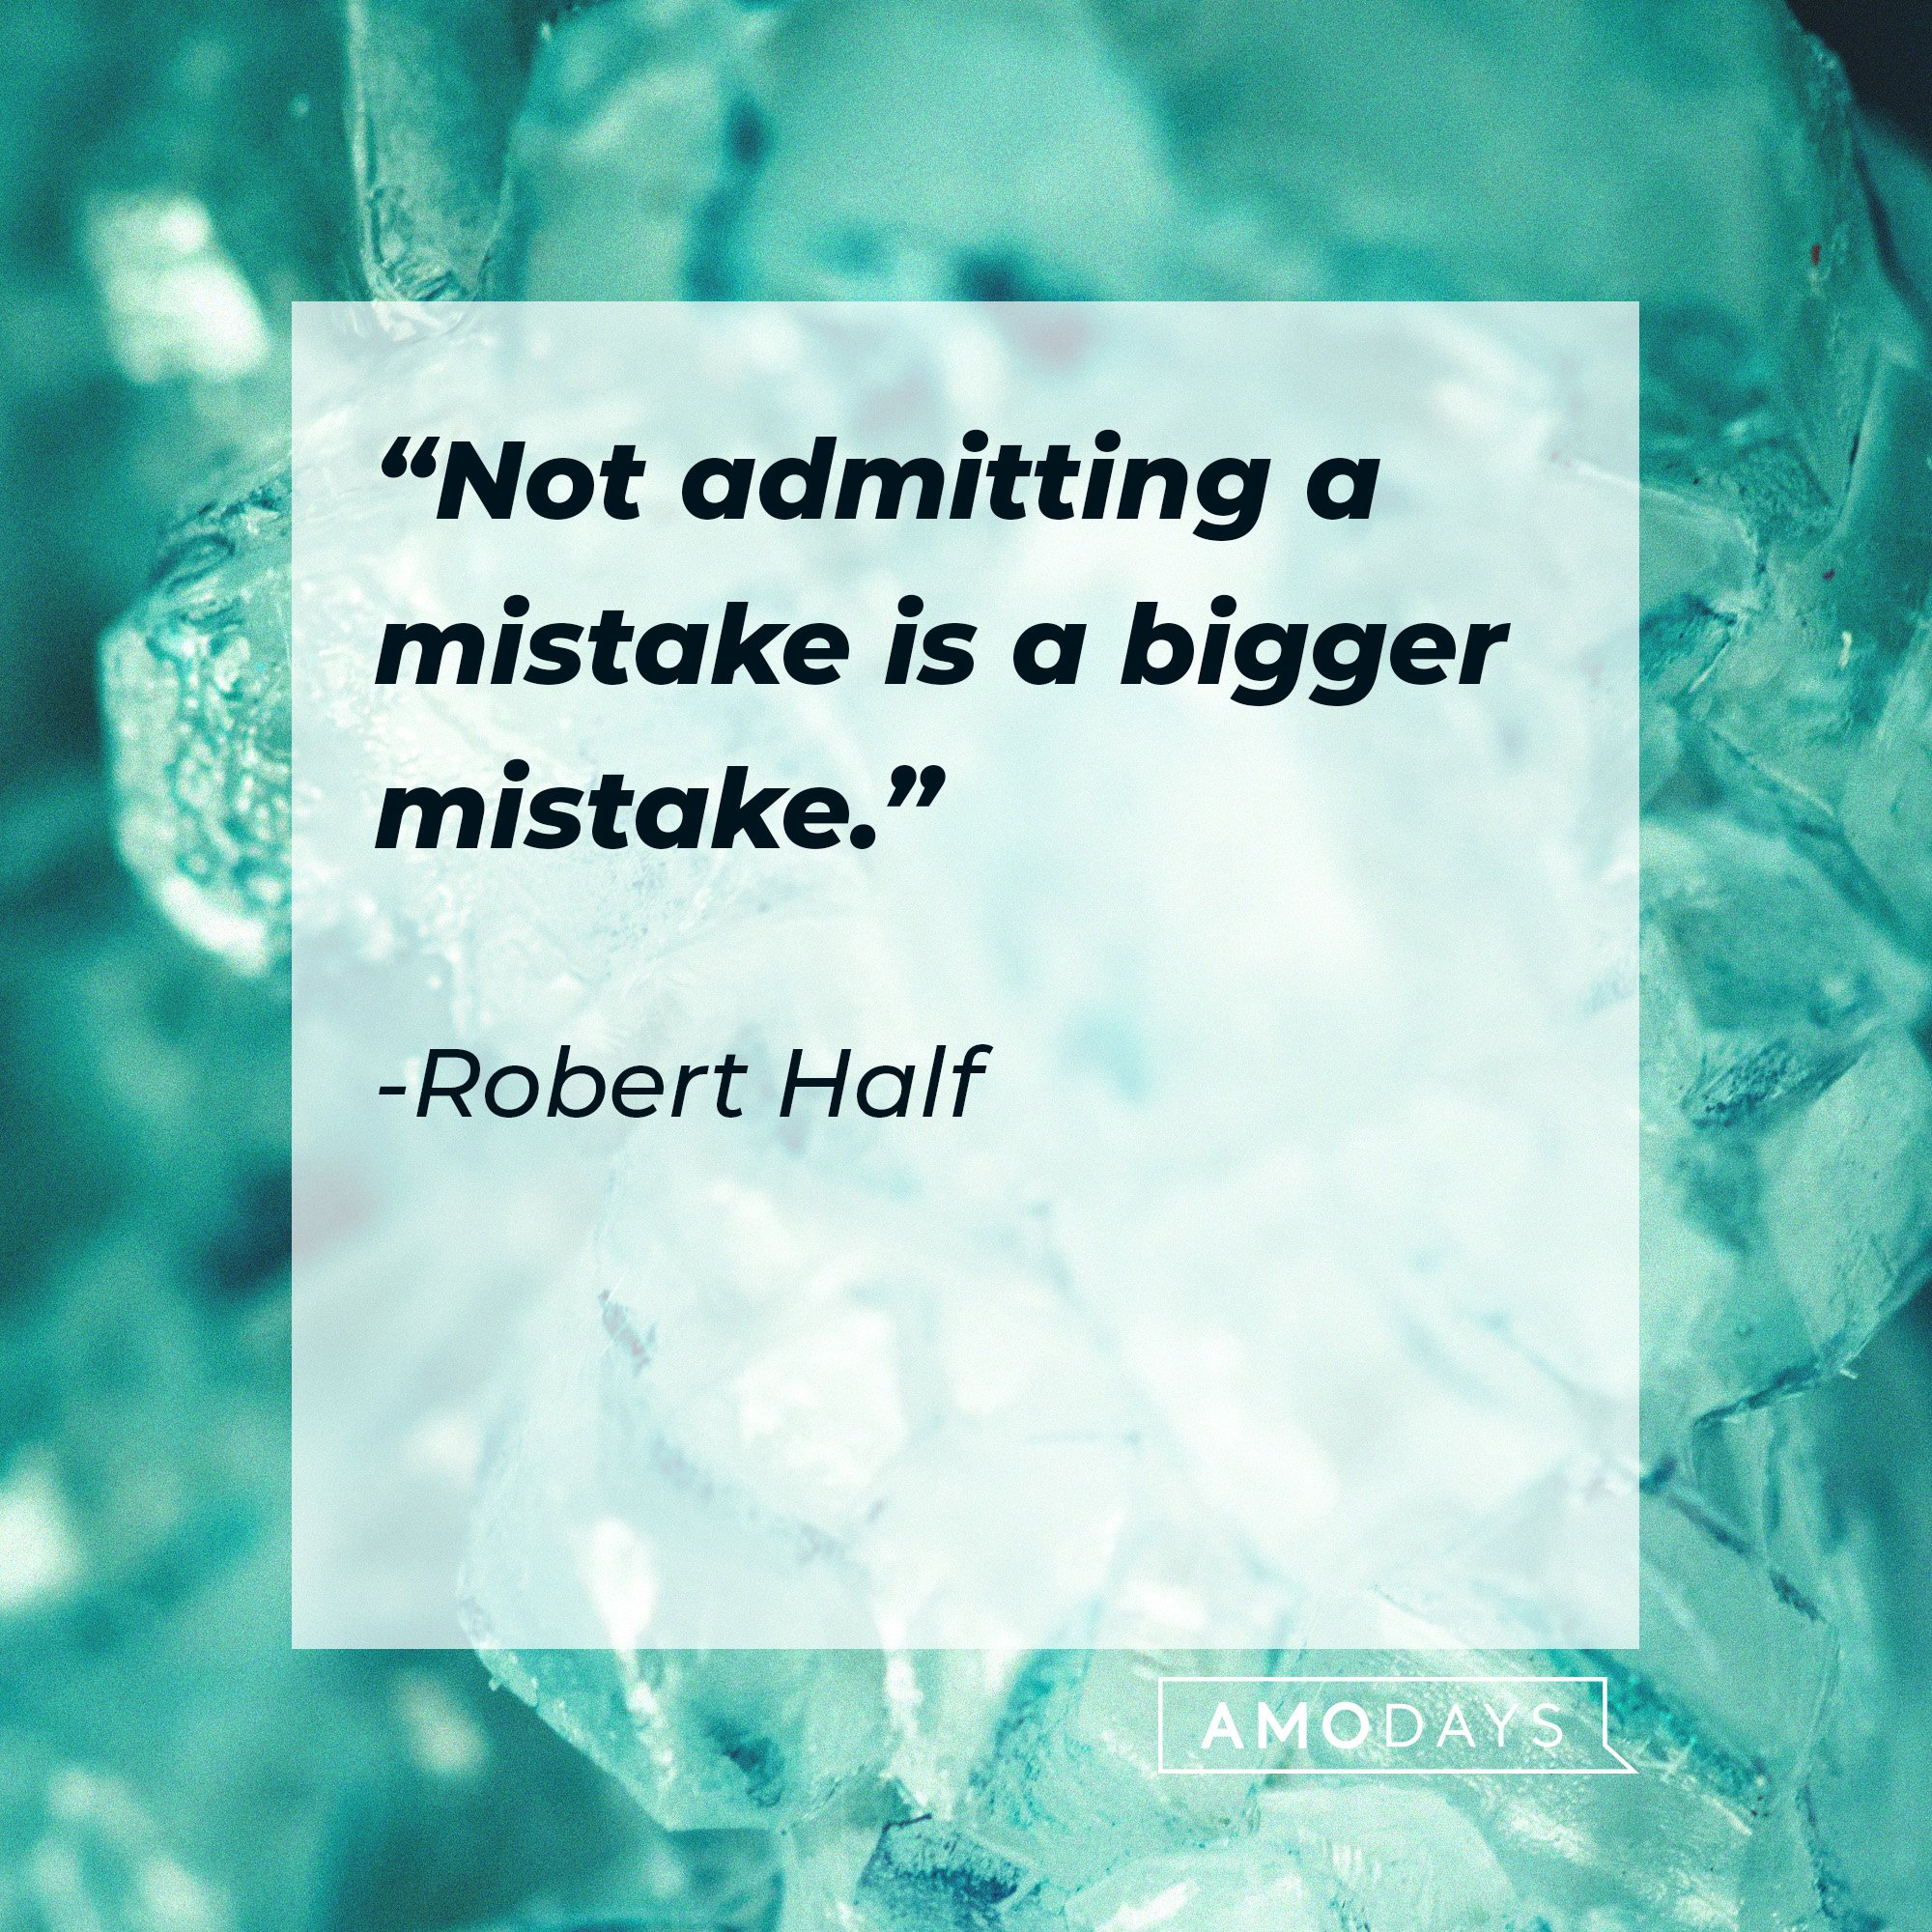 Robert Half's quote: “Not admitting a mistake is a bigger mistake.” | Image: AmoDays